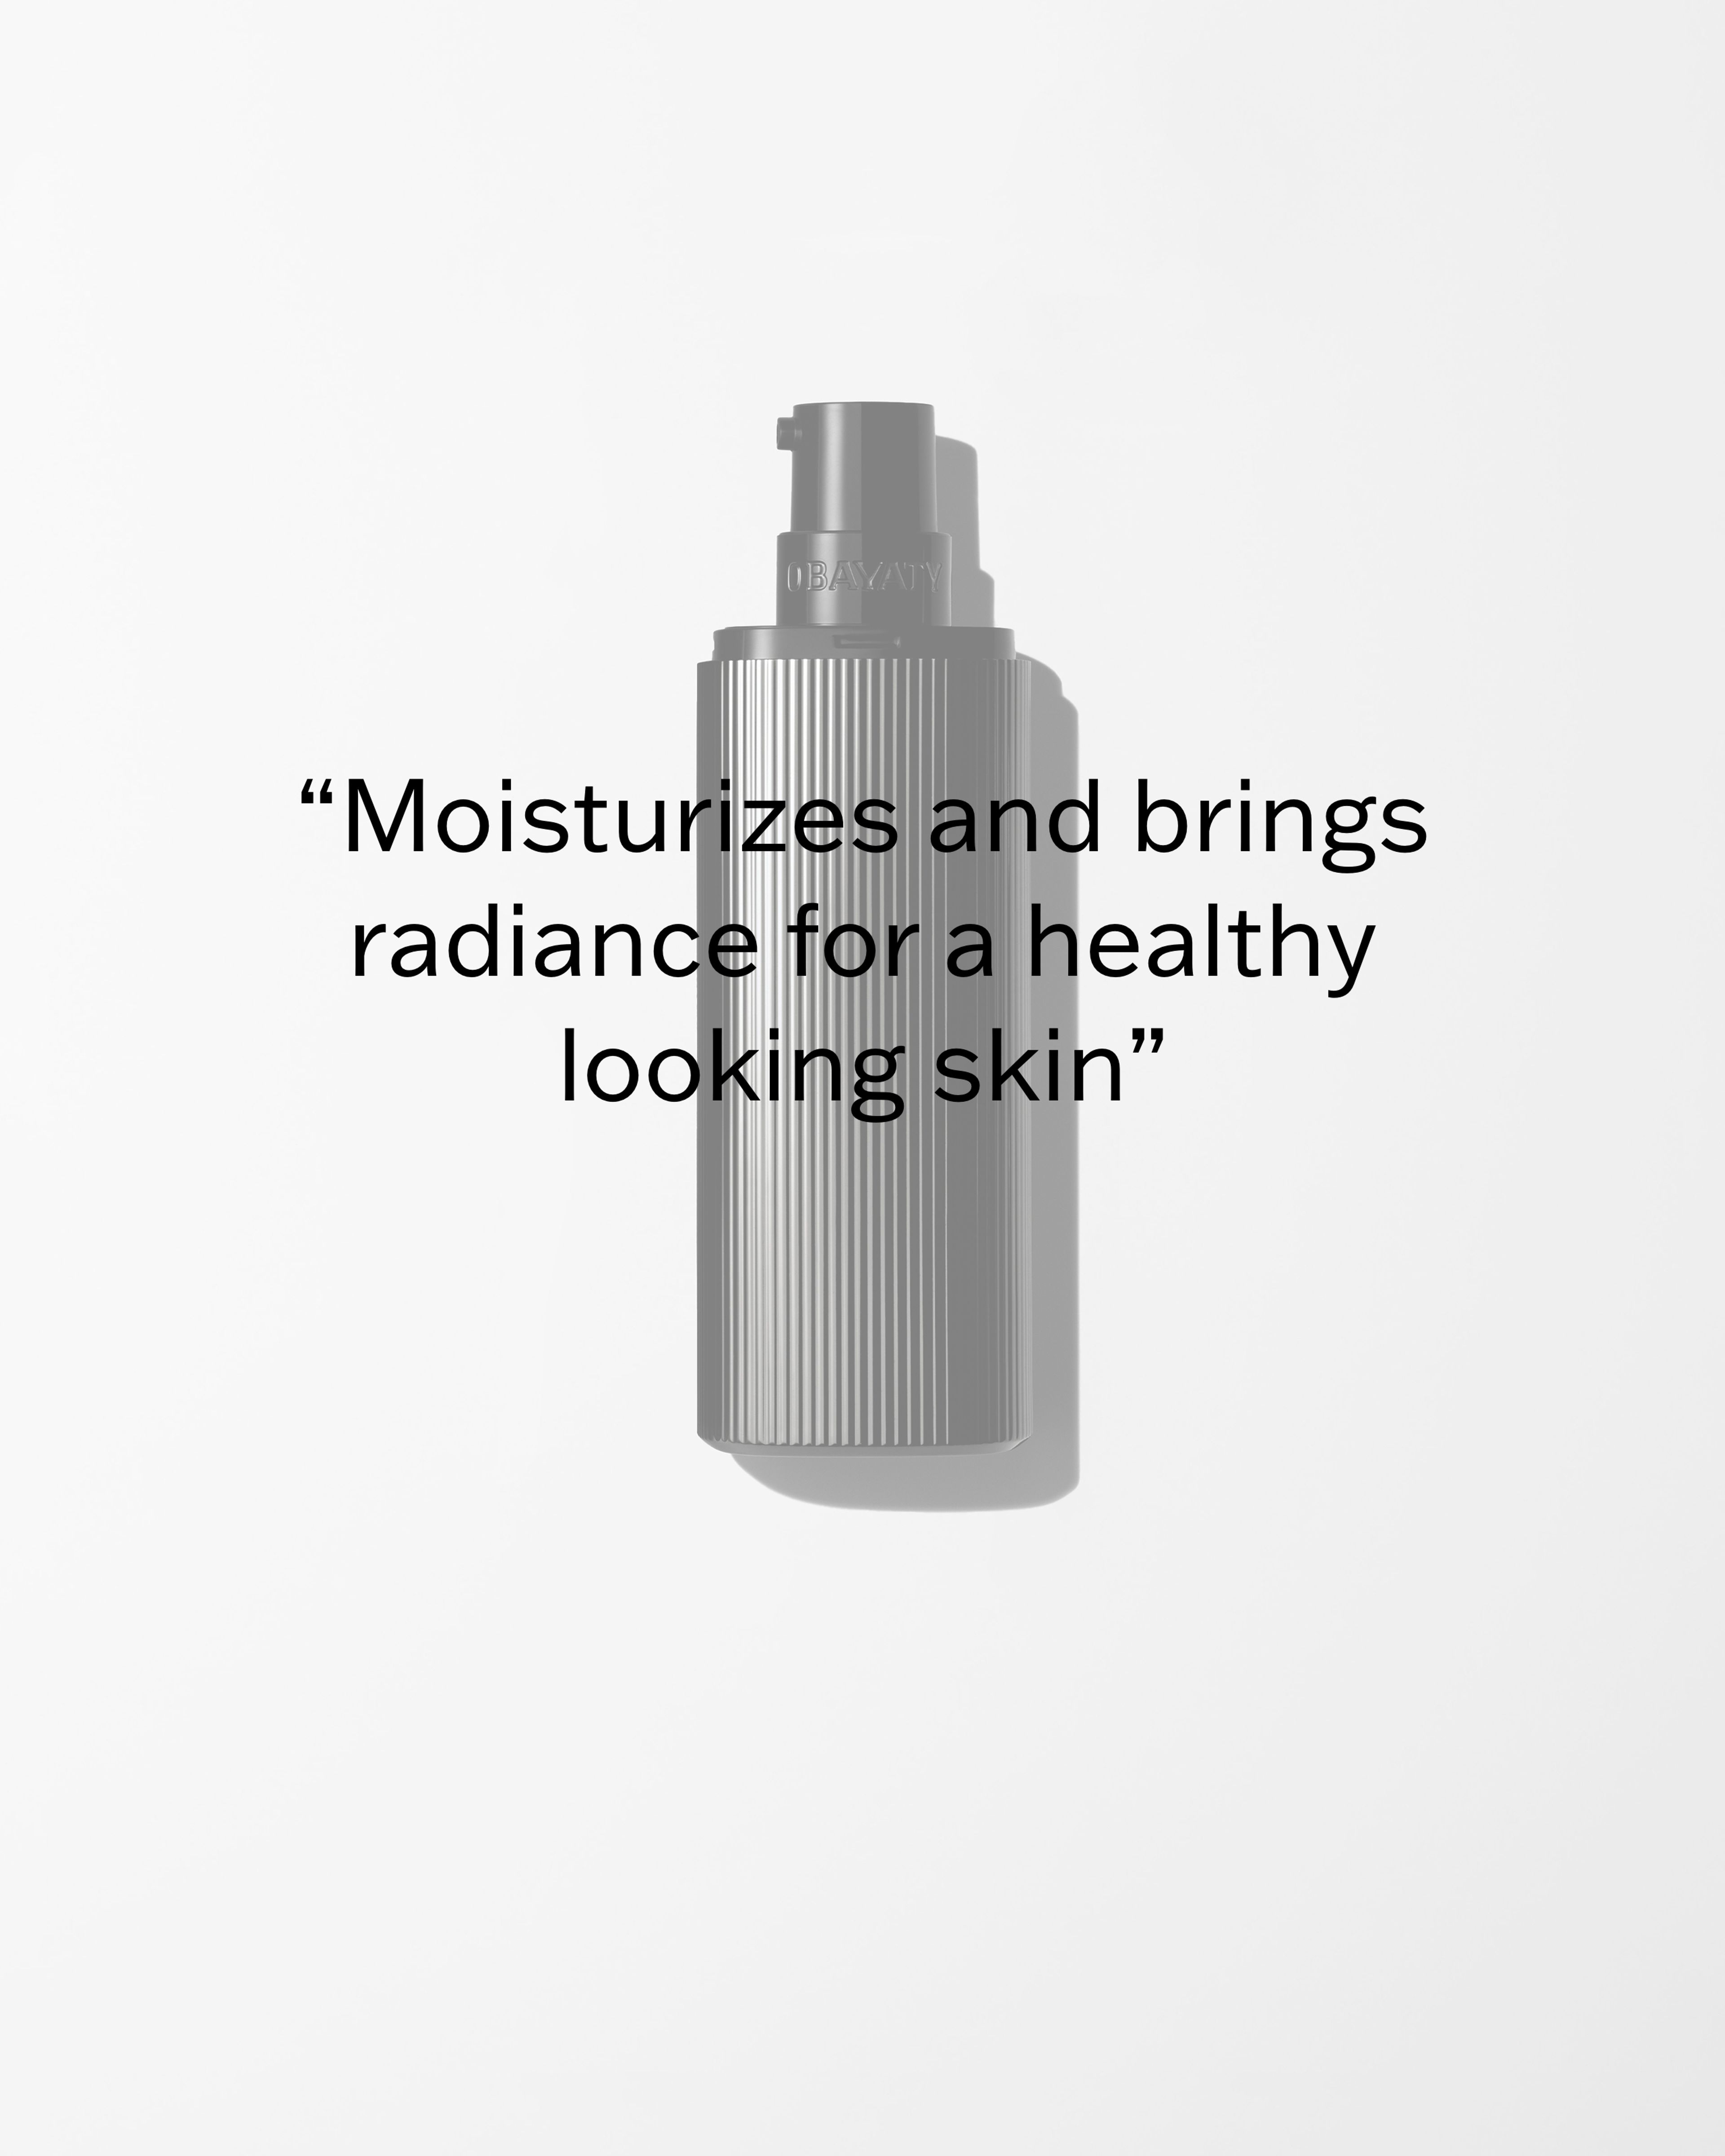 Men's moisturizer laying on a grey surface